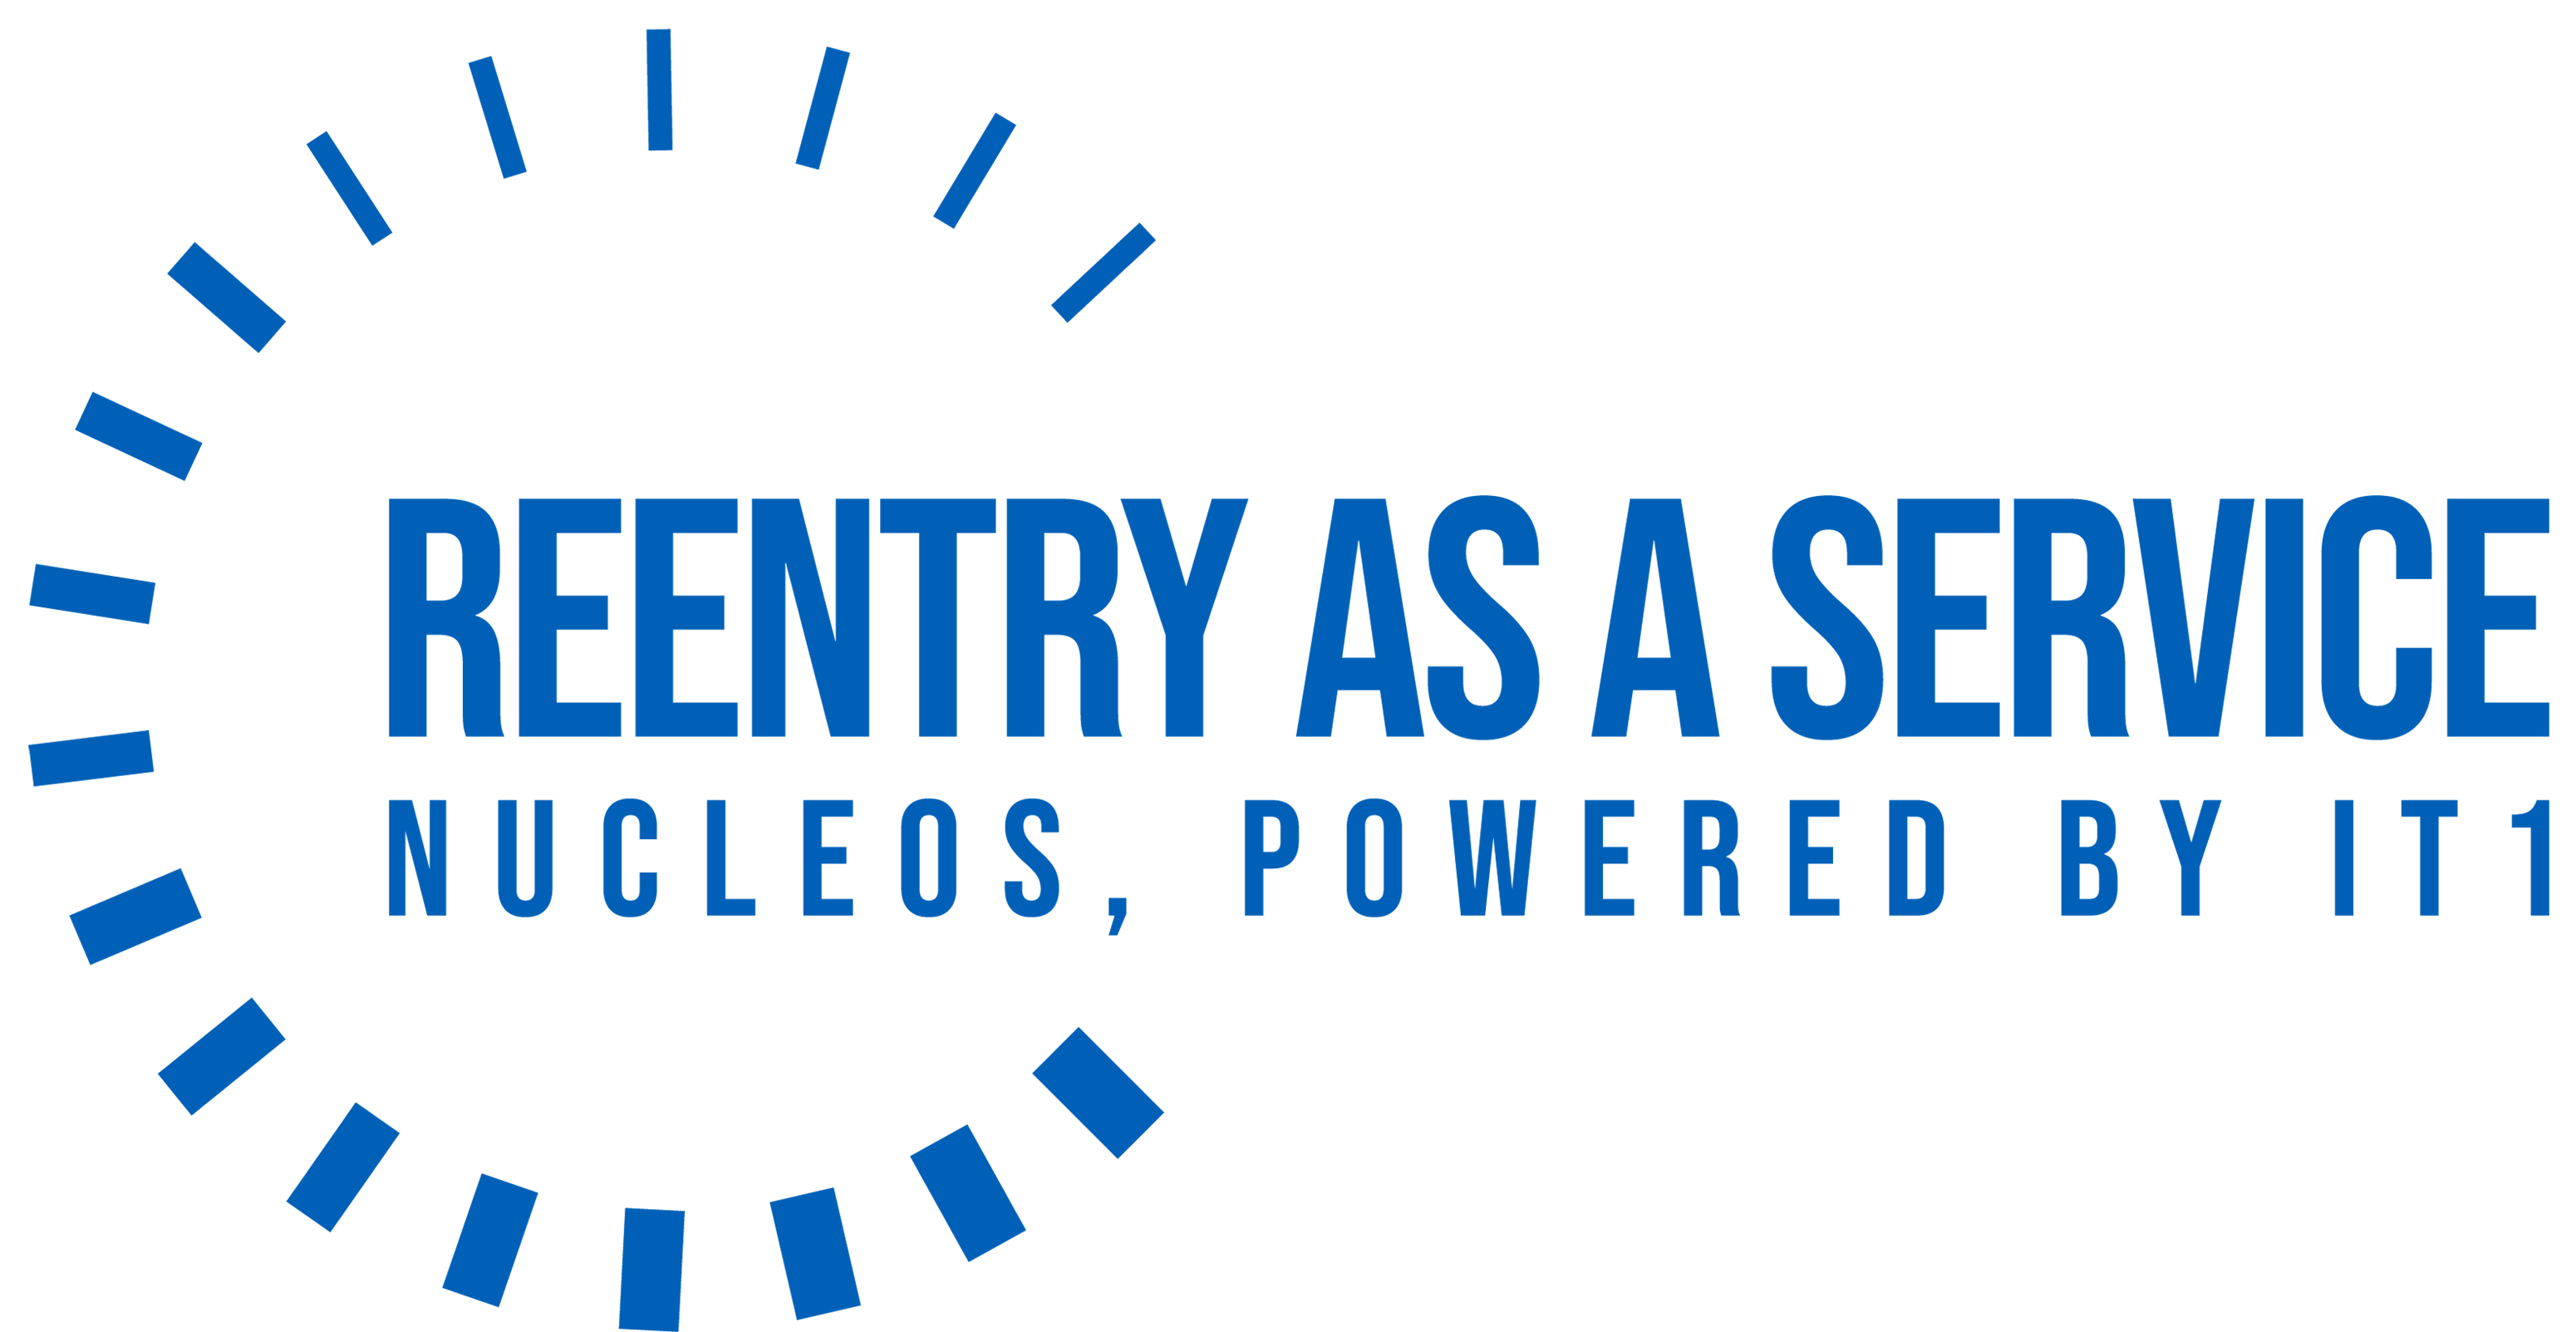 Reentry as a Service - Powered by Nucleos and iT1